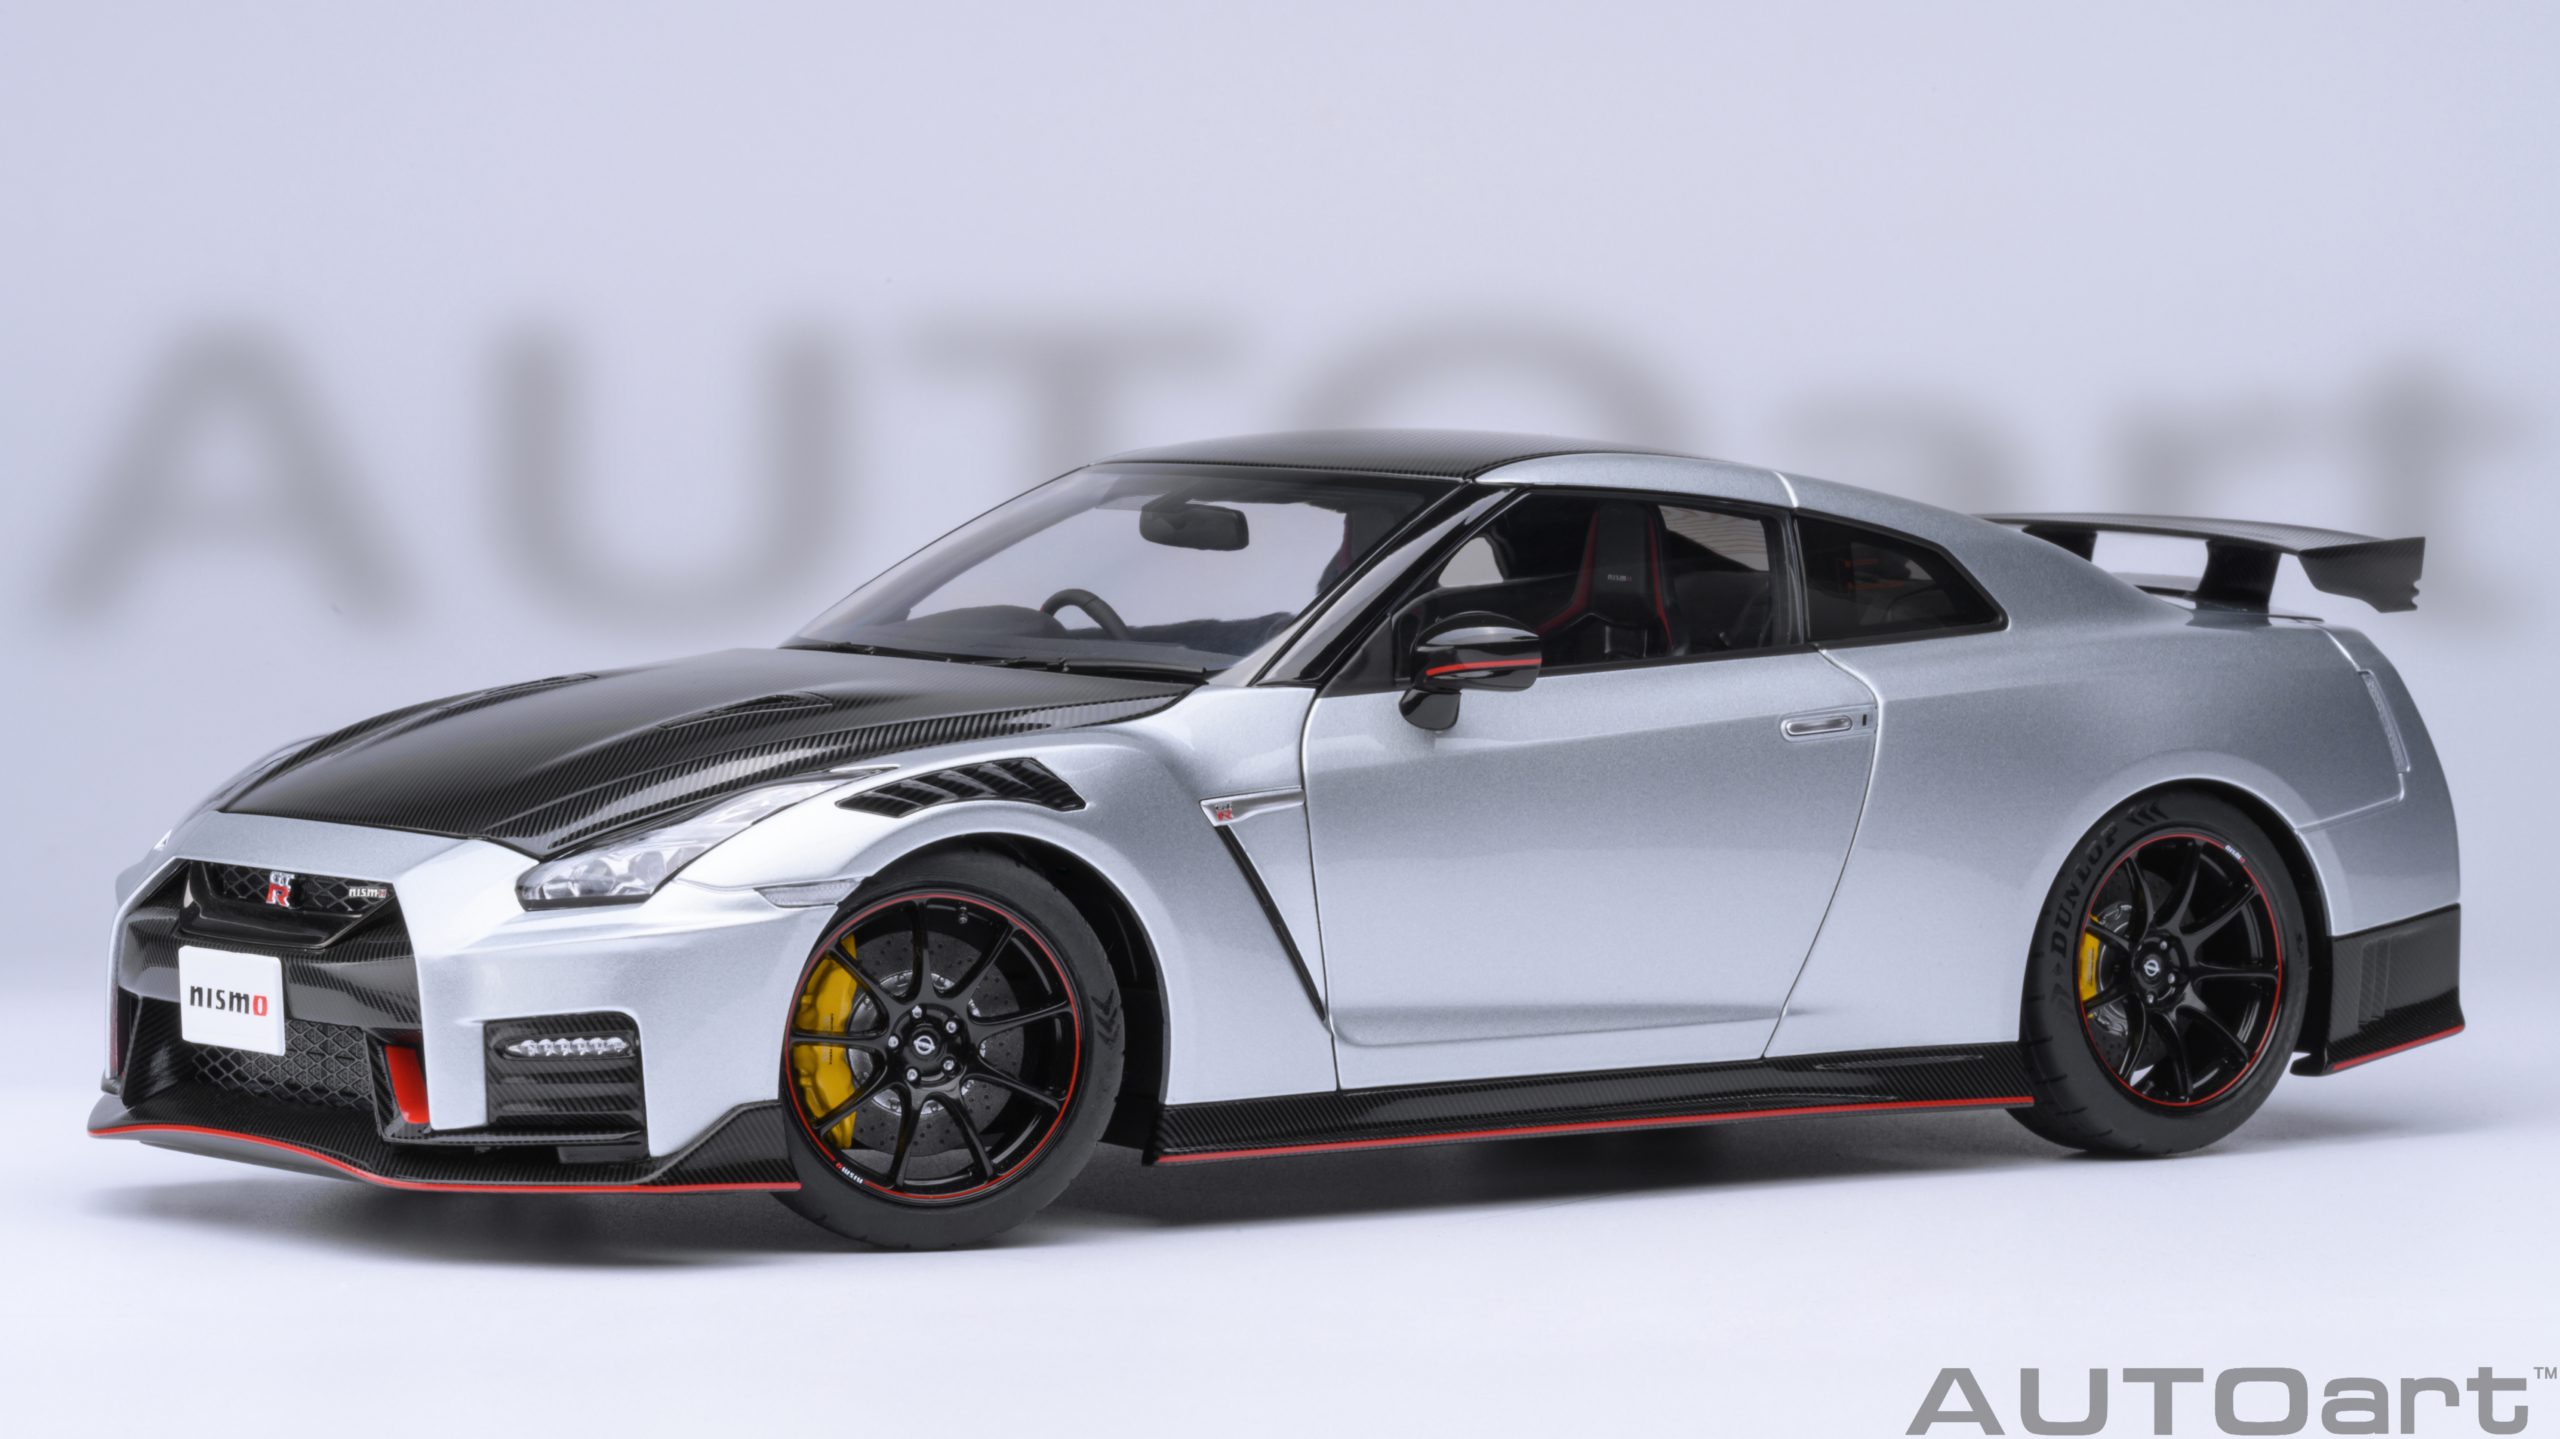 autoart-77503-1-Nissan-GT-R-R35-NISMO-Special-Edition-ultimate-metal-silver